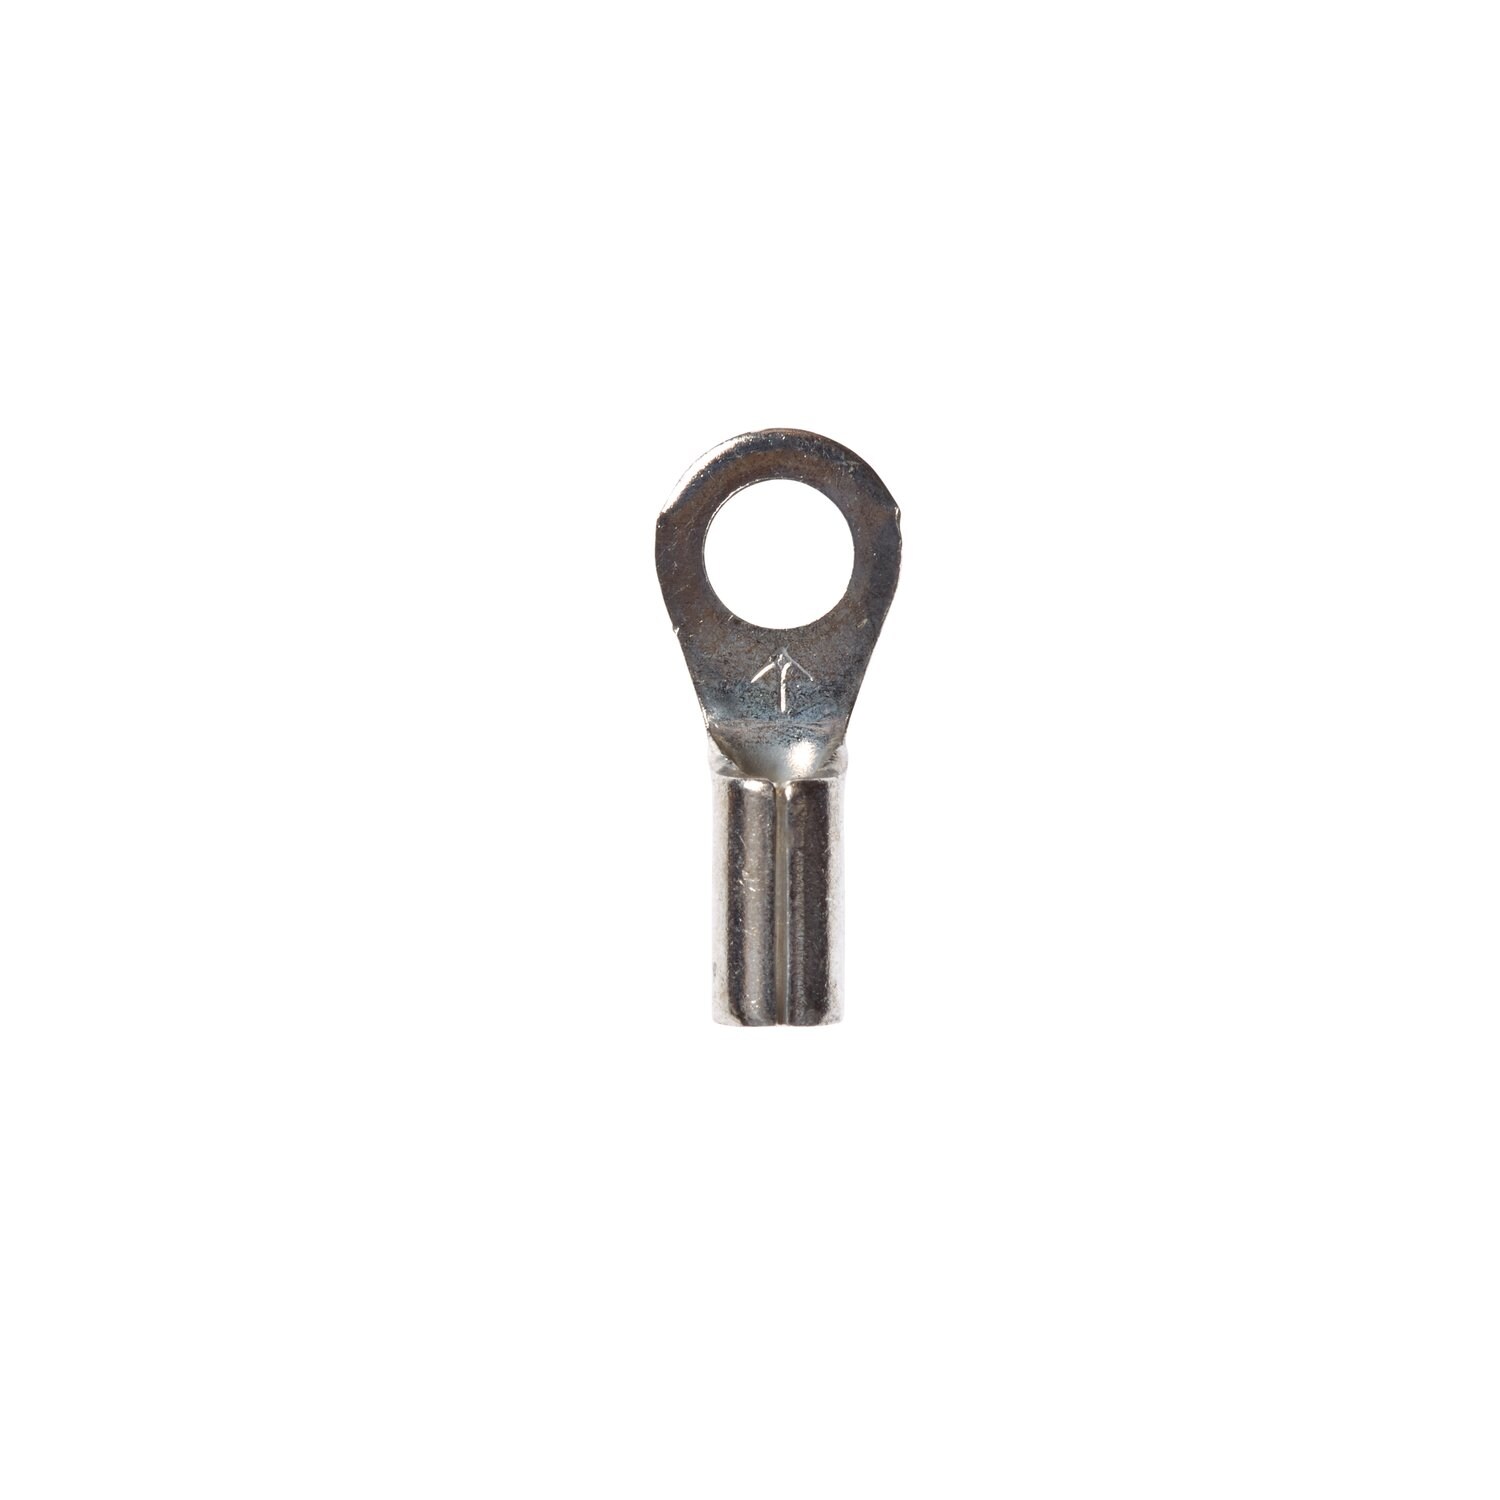 7100163916 - 3M Scotchlok Ring Tongue, Non-Insulated Butted Seam MU18-6R/SK, Stud
Size 6, 1000/Case